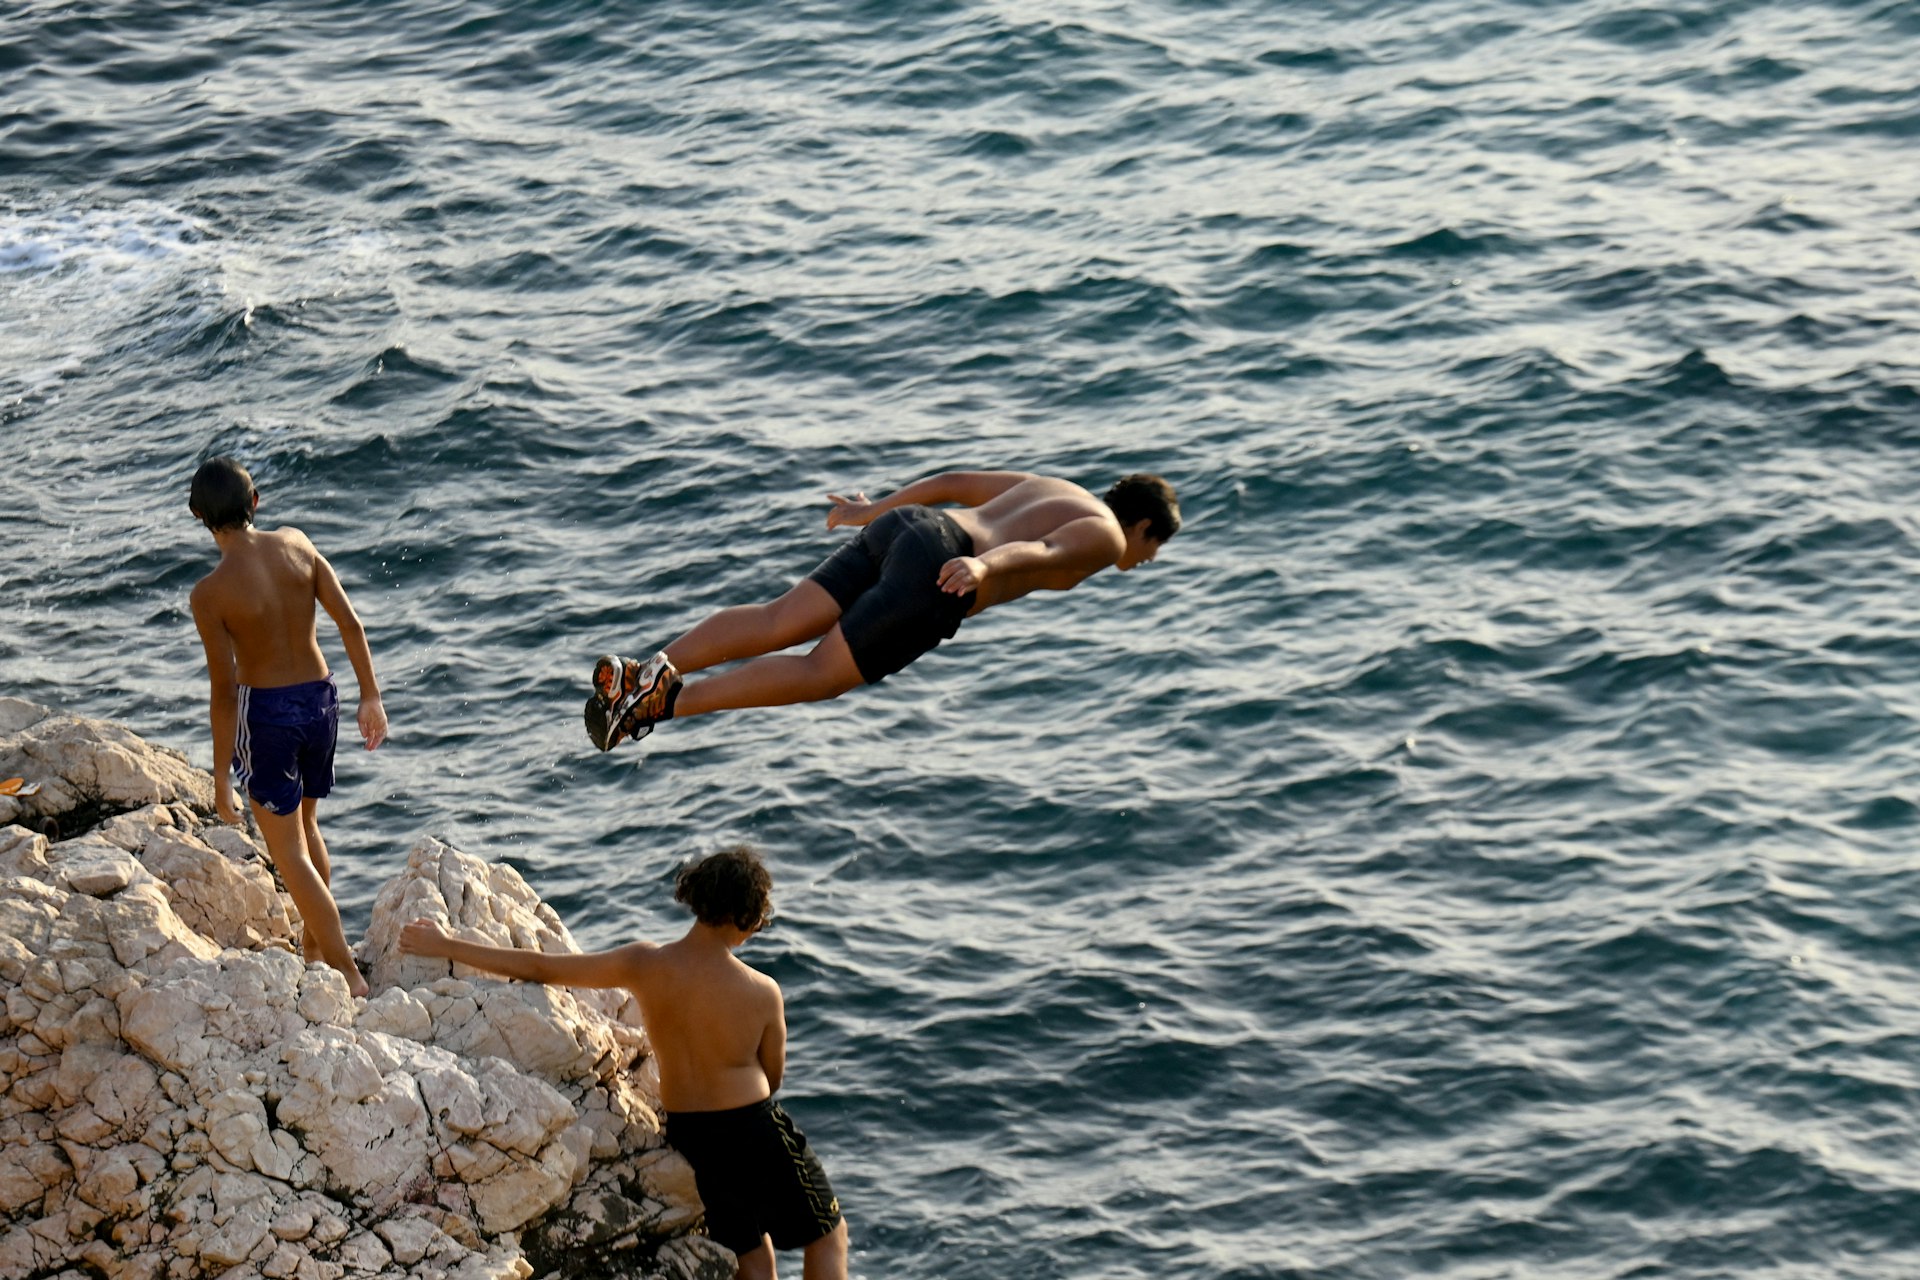 Young men dive into the Mediterranean Sea in Marseille, France